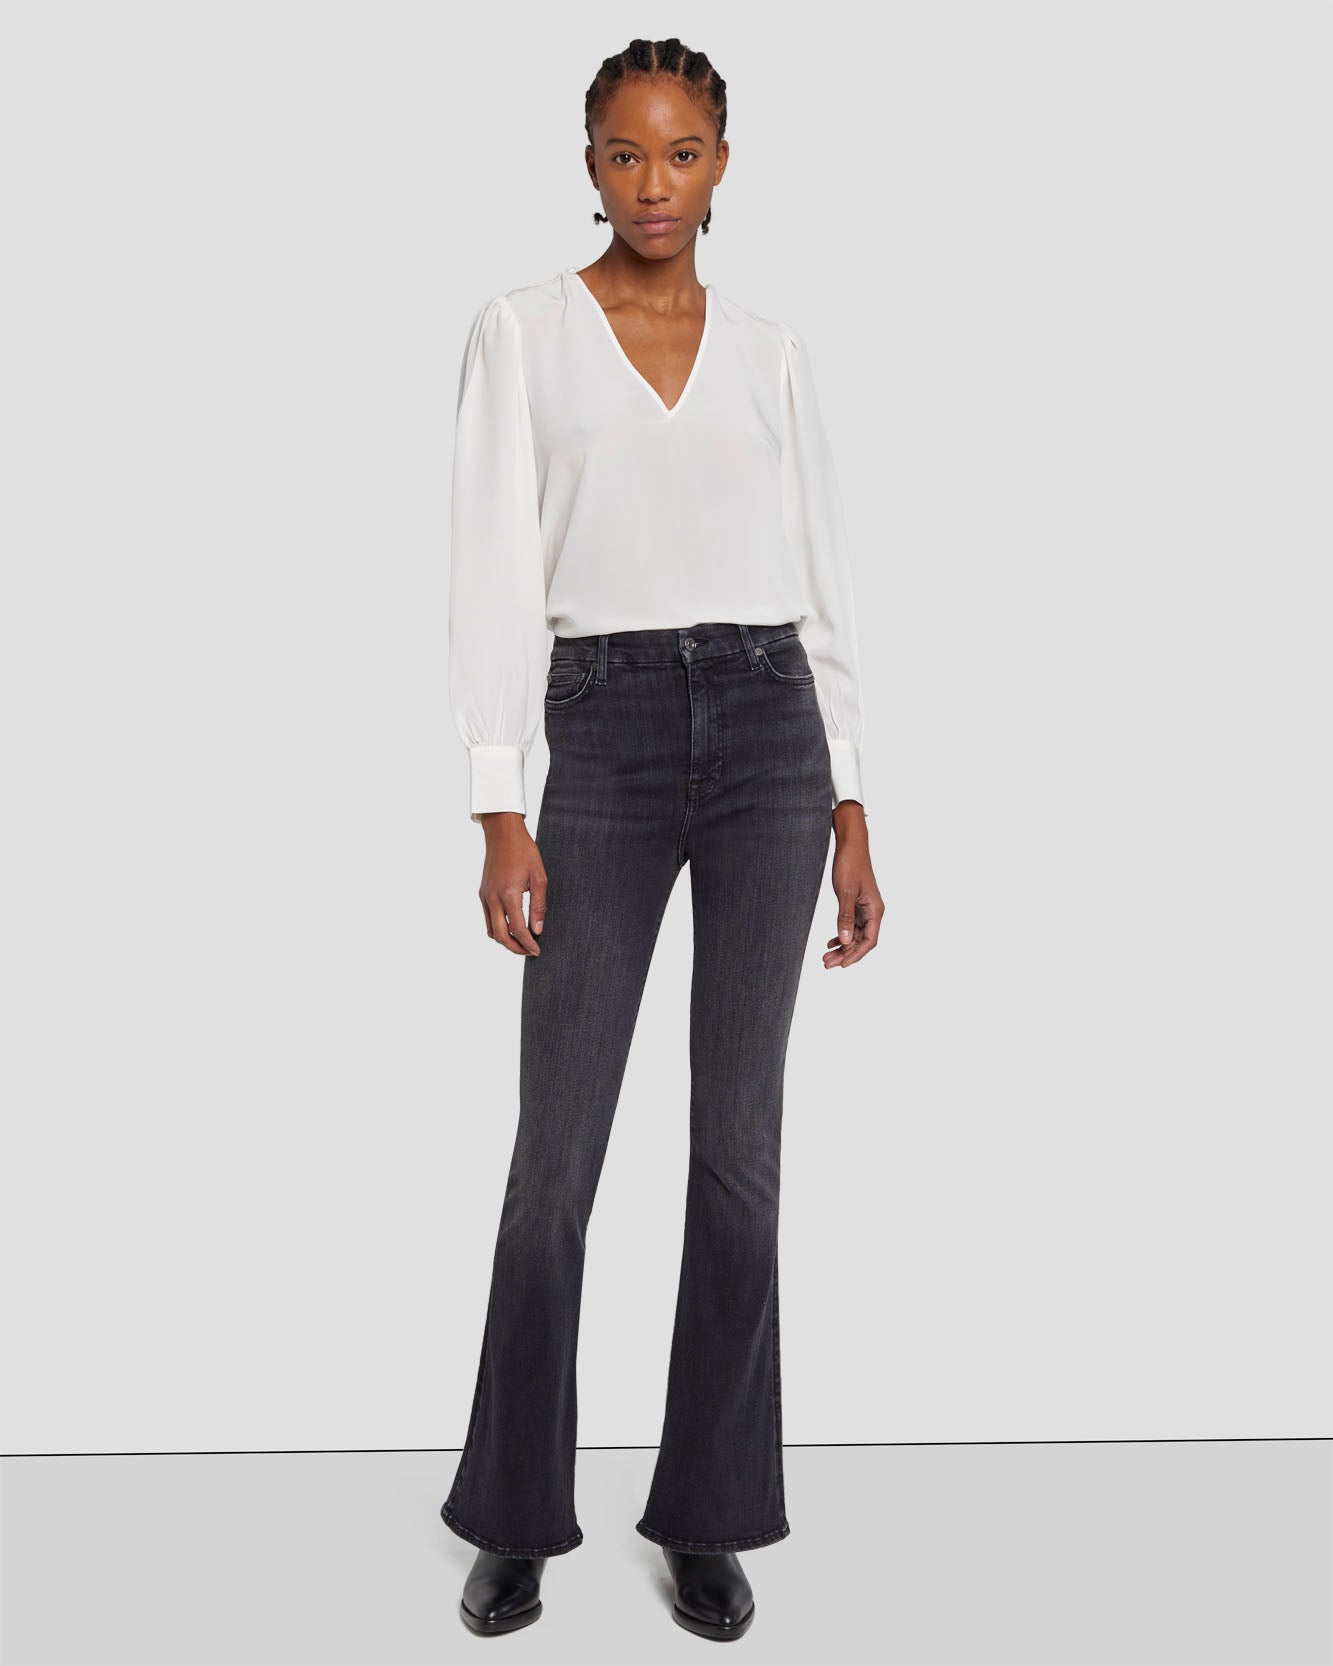 Tailorless No Filter UHR Skinny Boot in Cosmos | 7 For All Mankind